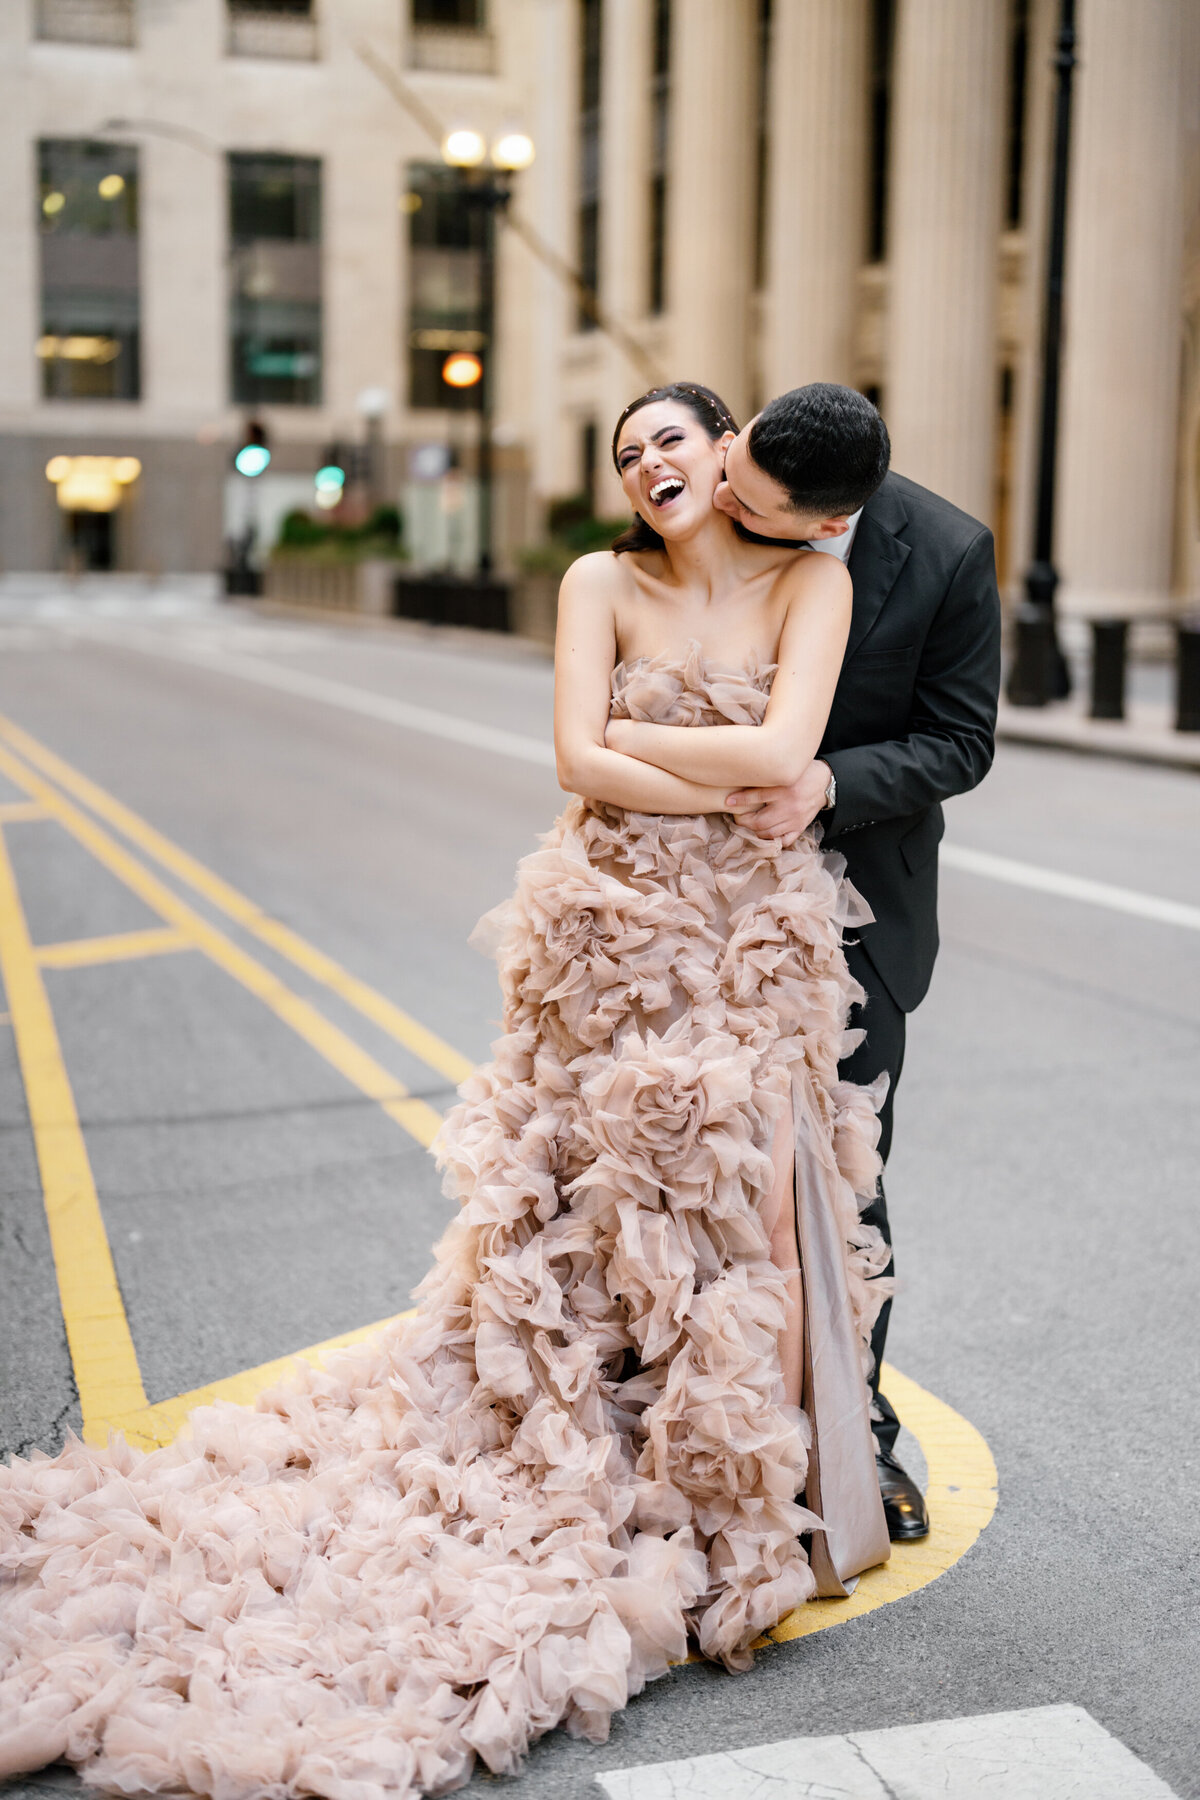 Aspen-Avenue-Chicago-Wedding-Photographer-Rookery-Engagement-Session-Histoircal-Stairs-Moody-Dramatic-Magazine-Unique-Gown-Stemming-From-Love-Emily-Rae-Bridal-Hair-FAV-71